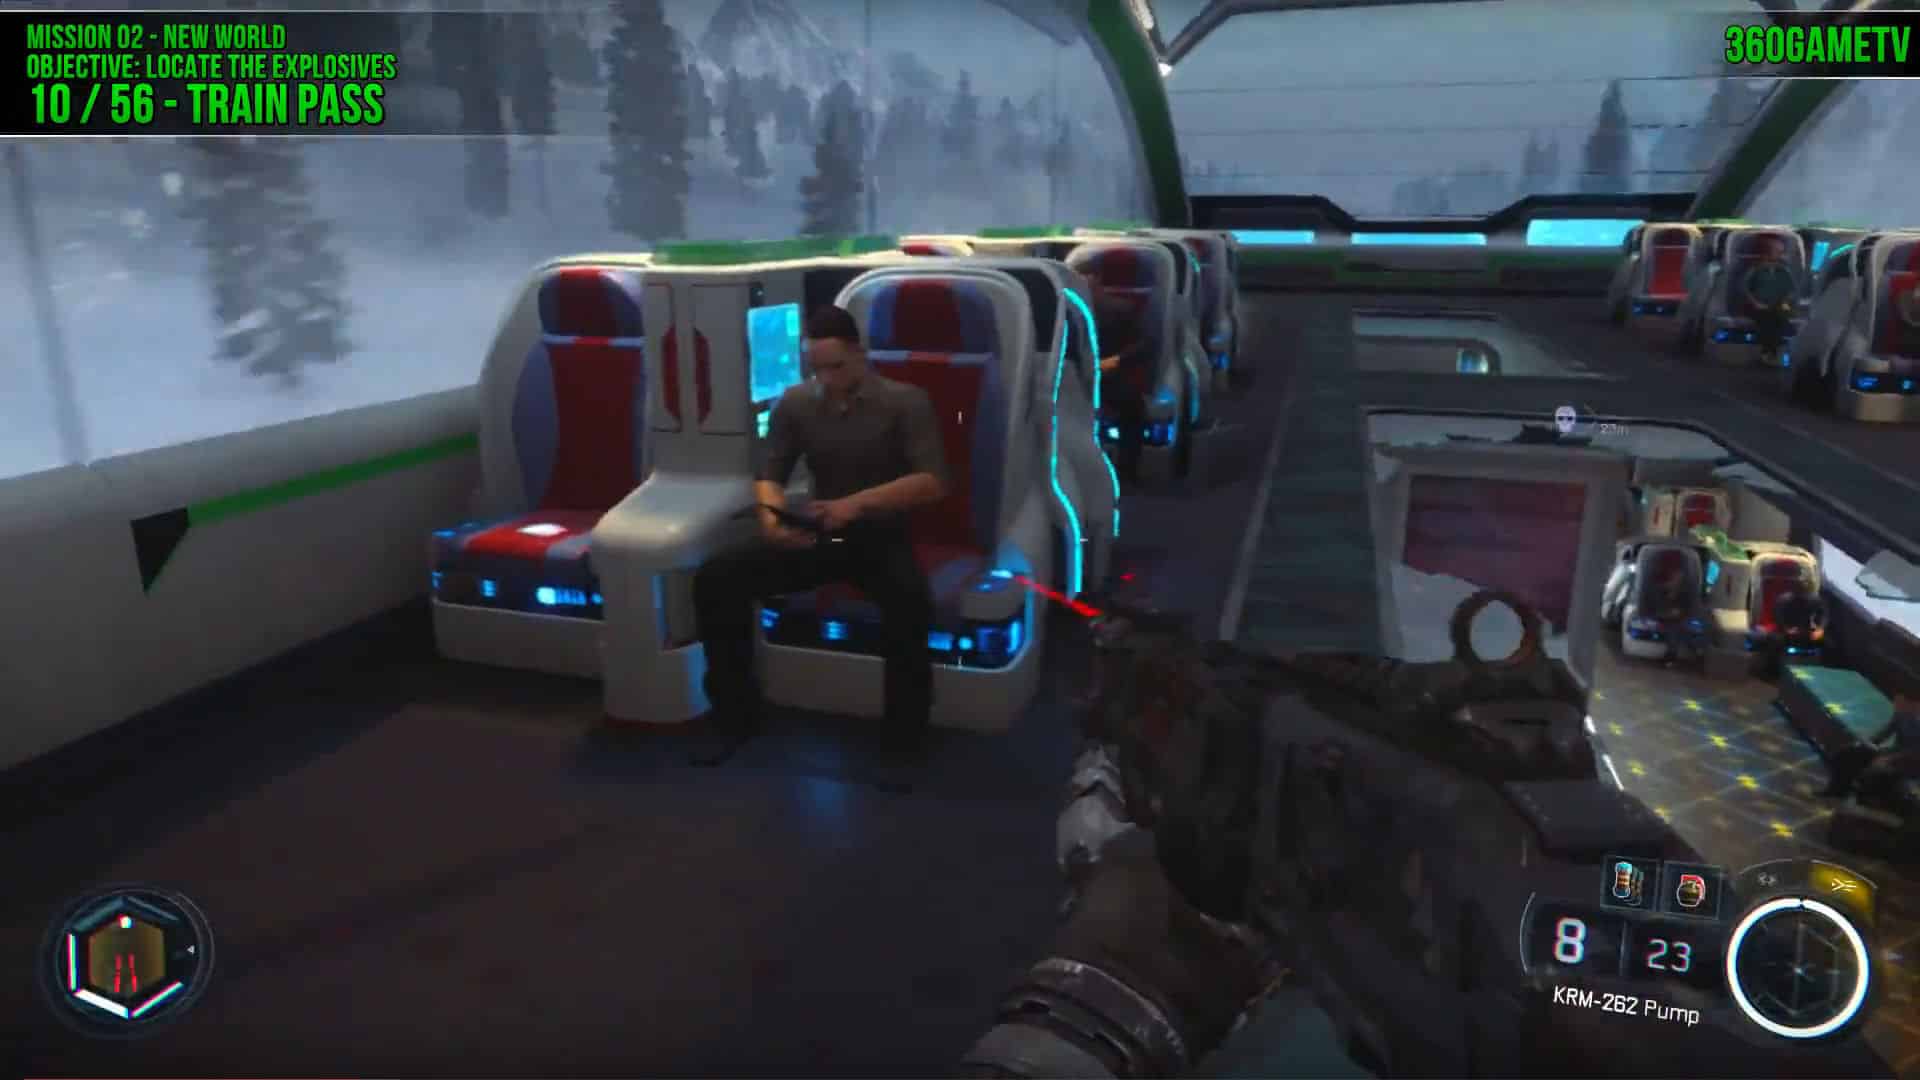 Call Of Duty Black Ops 3 Train Pass Location In Mission 2 New World